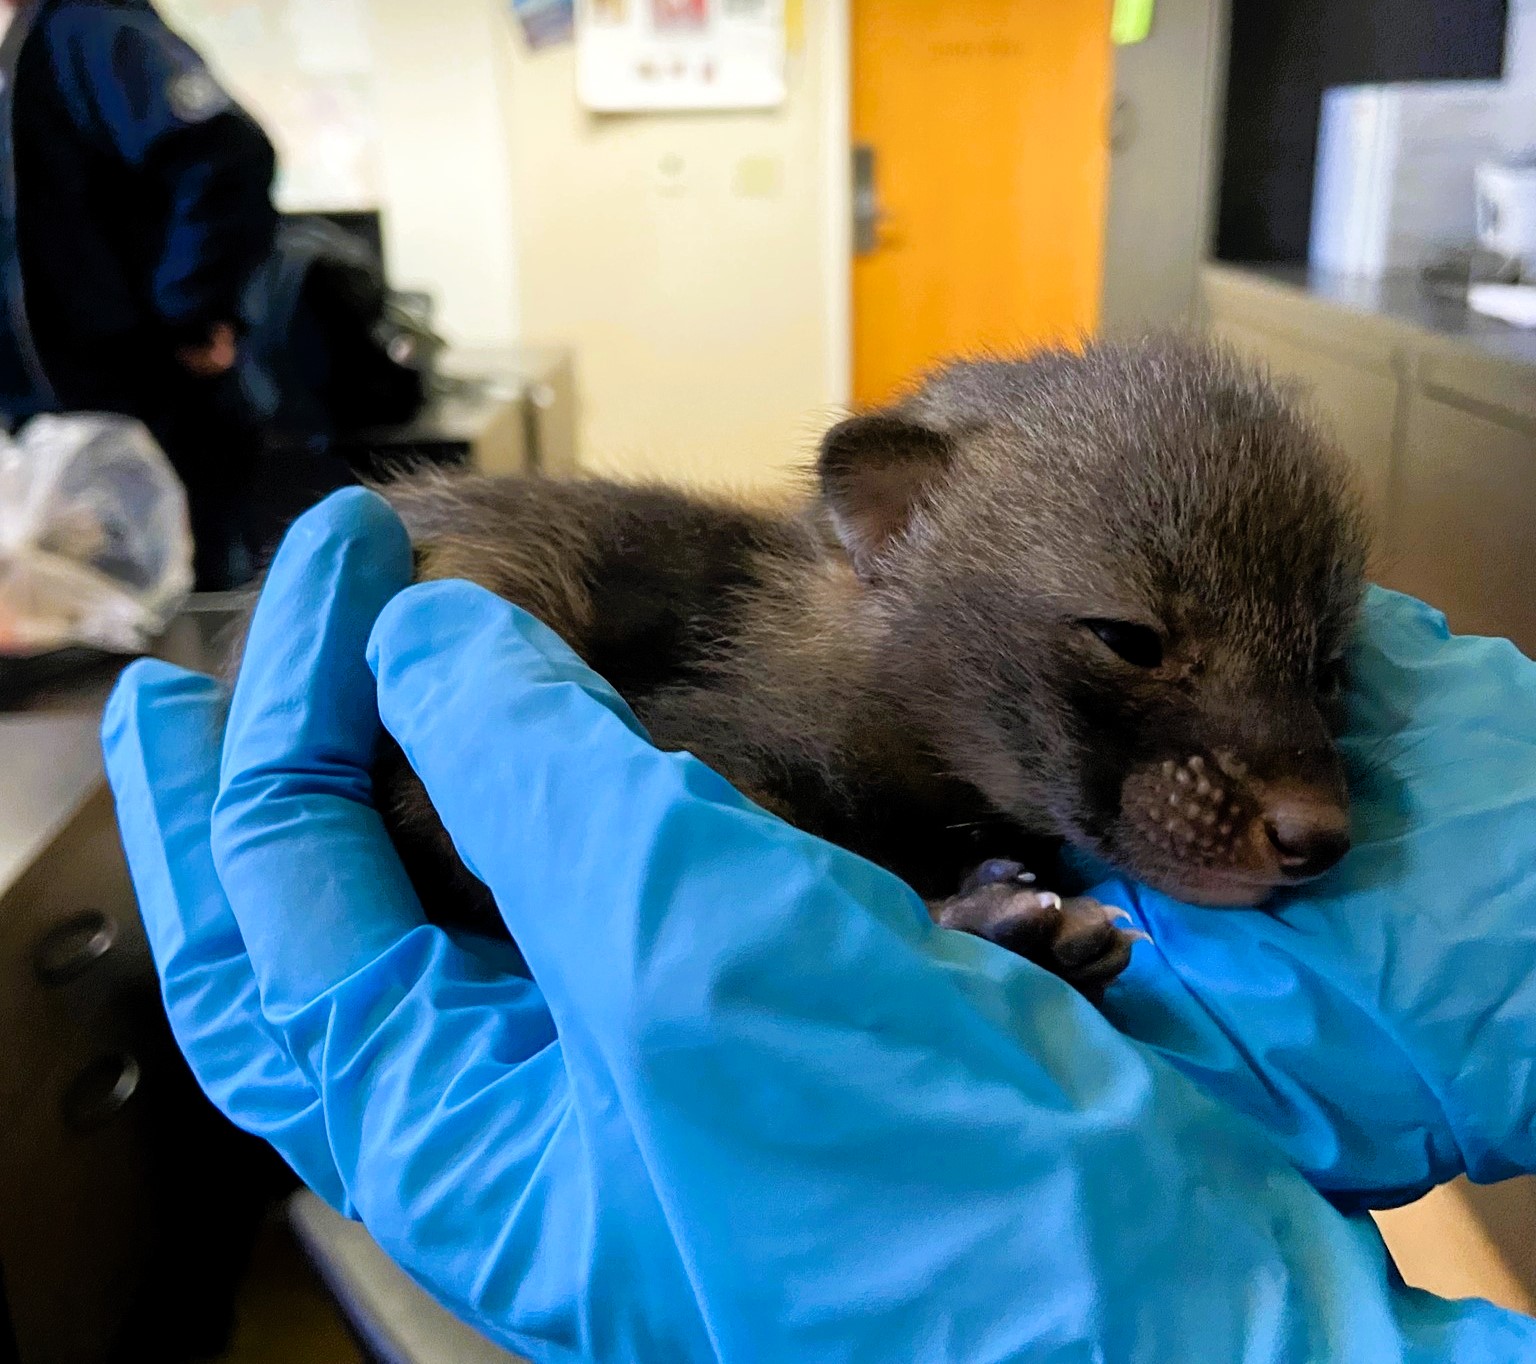 The Arizona Humane Society received a surprise when 'kittens' turned out to be baby grey foxes. They urge people not to intervene with wild animals, emphasizing the importance of leaving them for their mother to return. The foxes were transferred to Southwest Wildlife for proper care and eventual release into the wild.